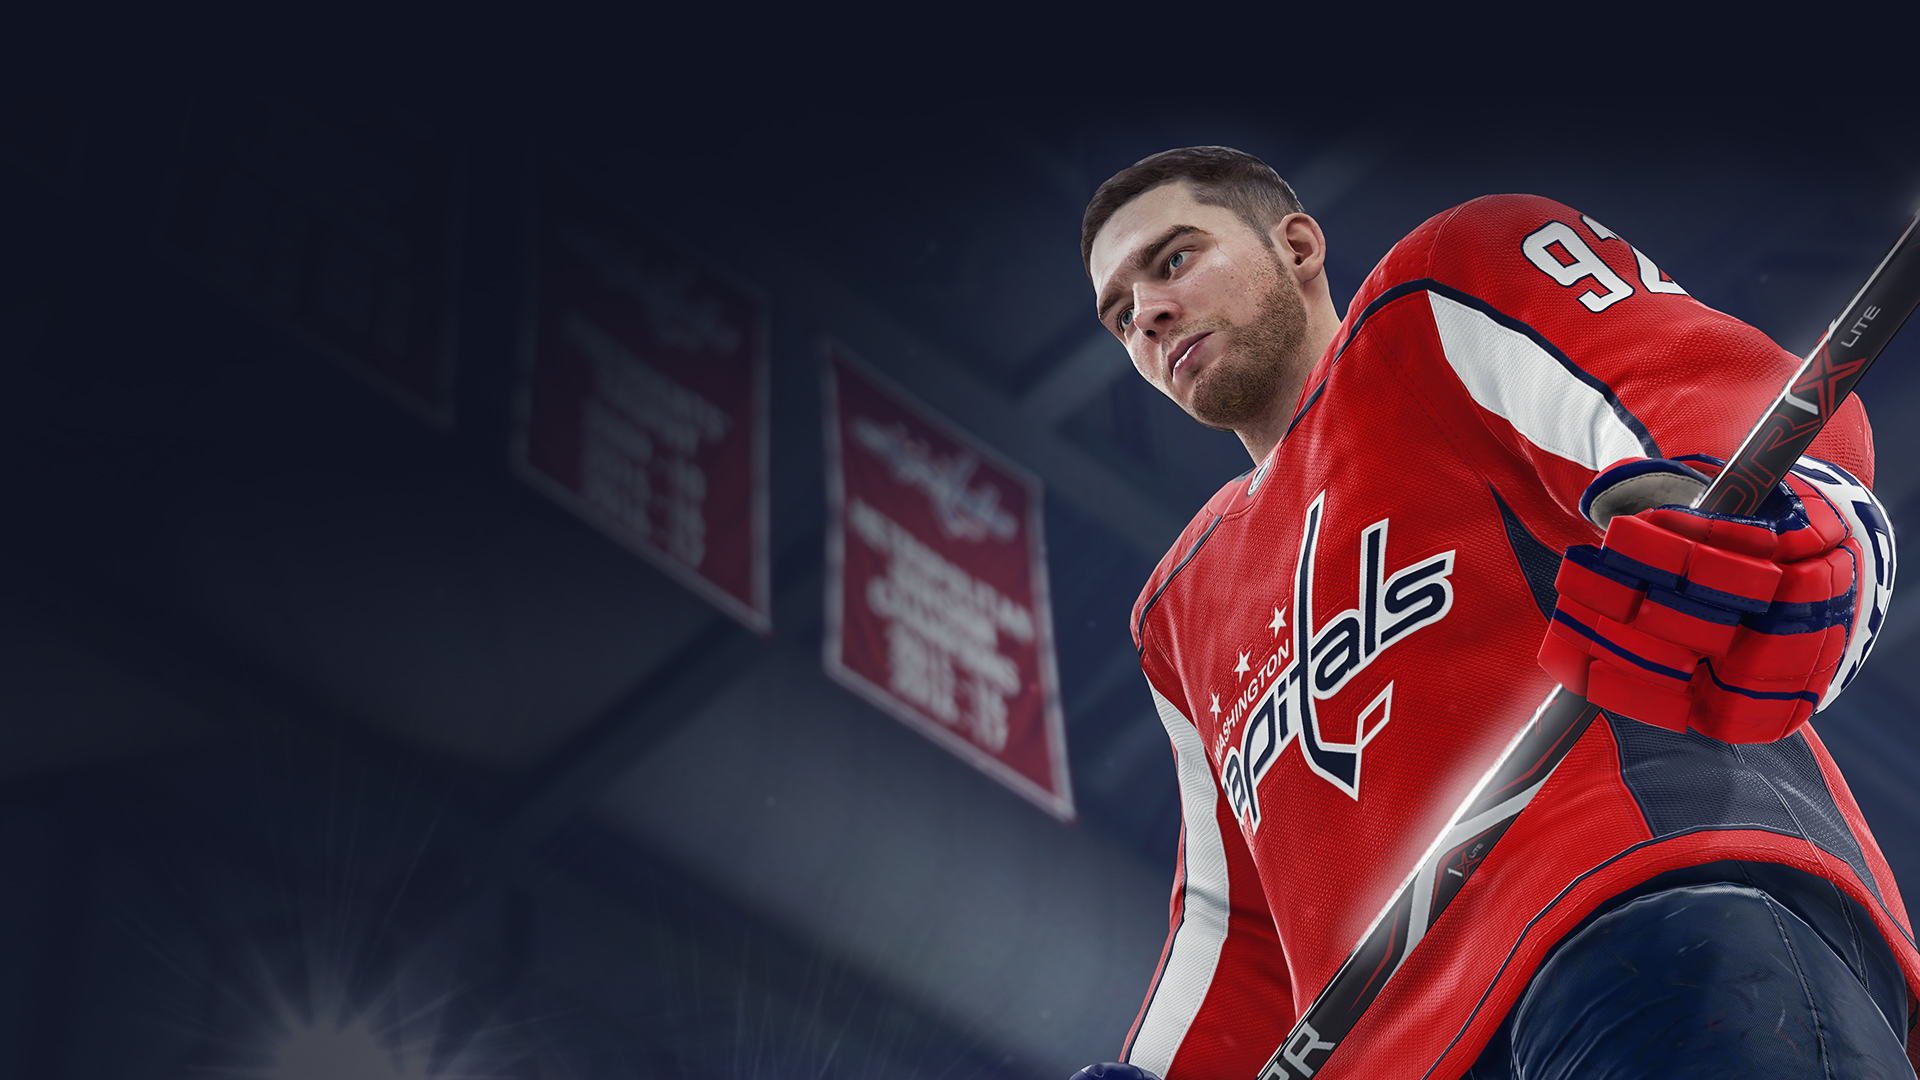 ea nhl 19 rosters